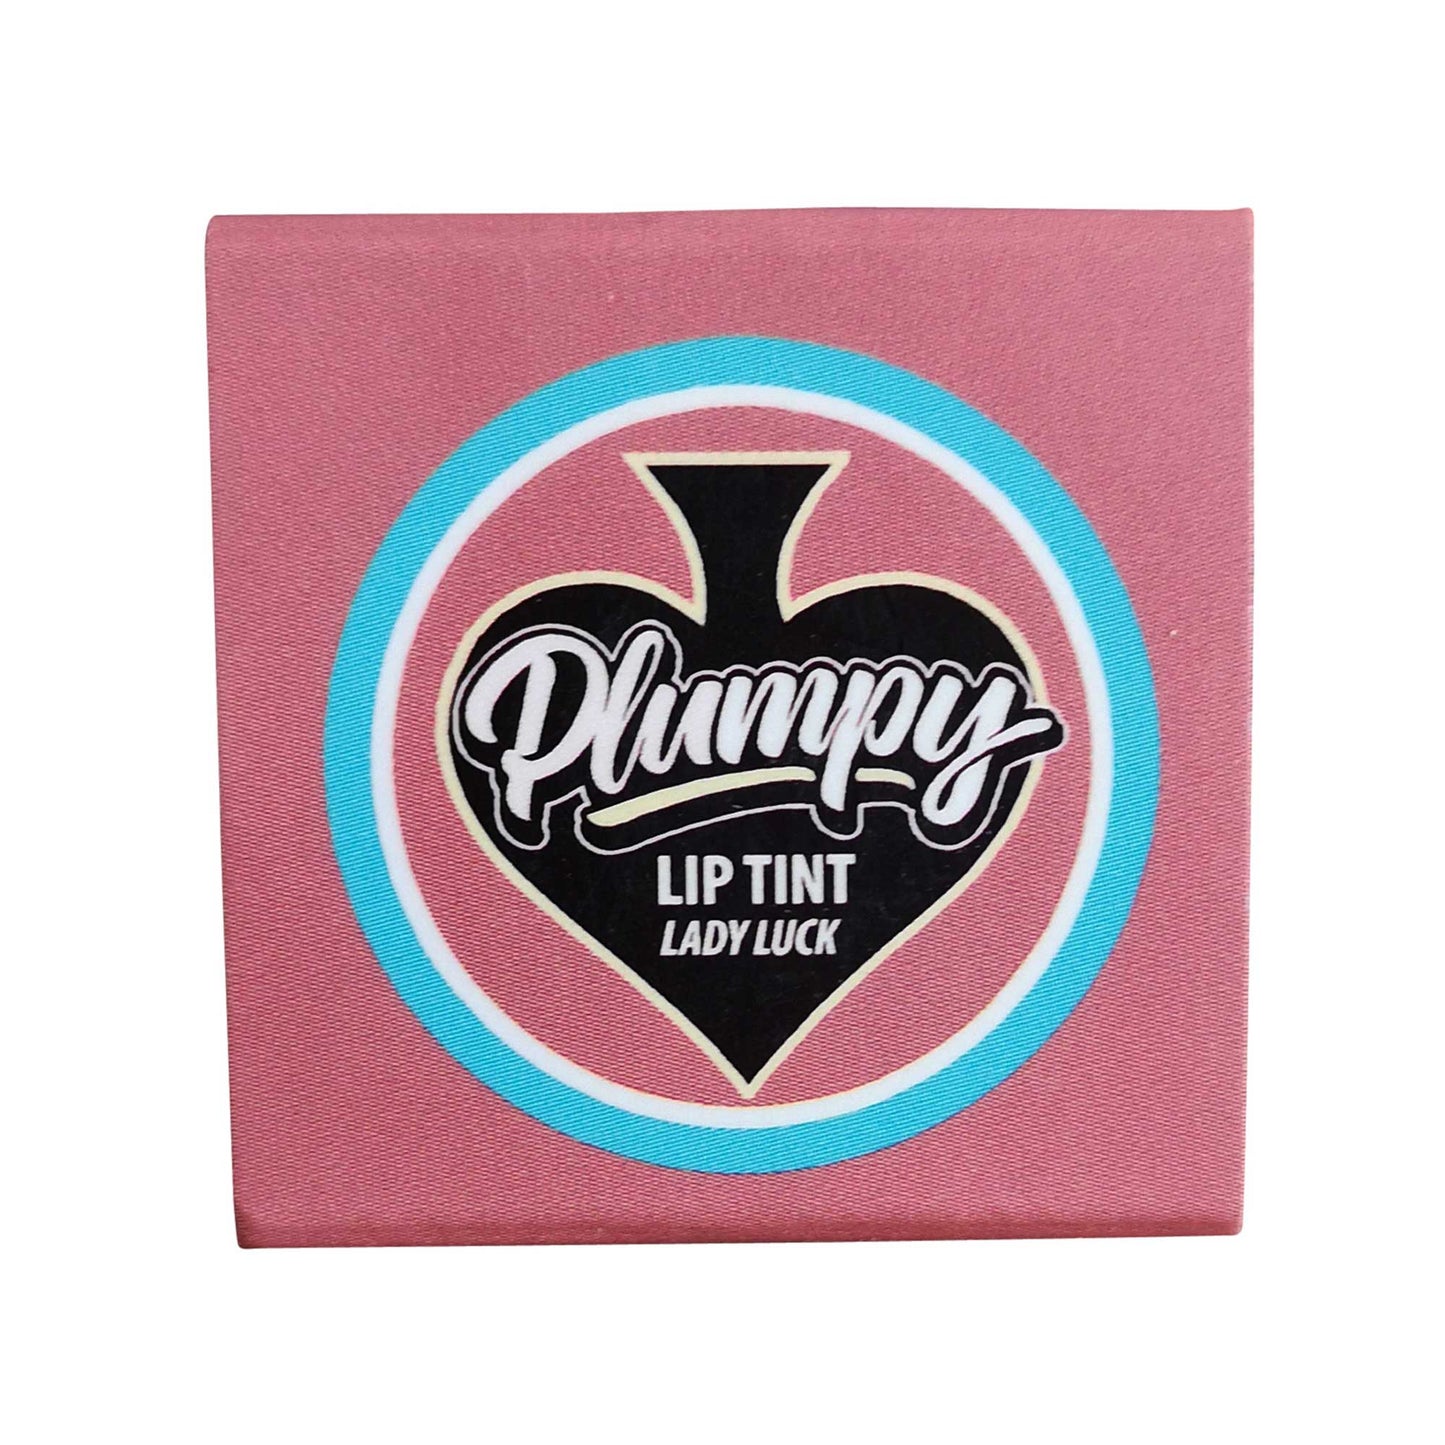 Plumpy Balms Lady Luck Natural Toffee Brown tinted lip balm  